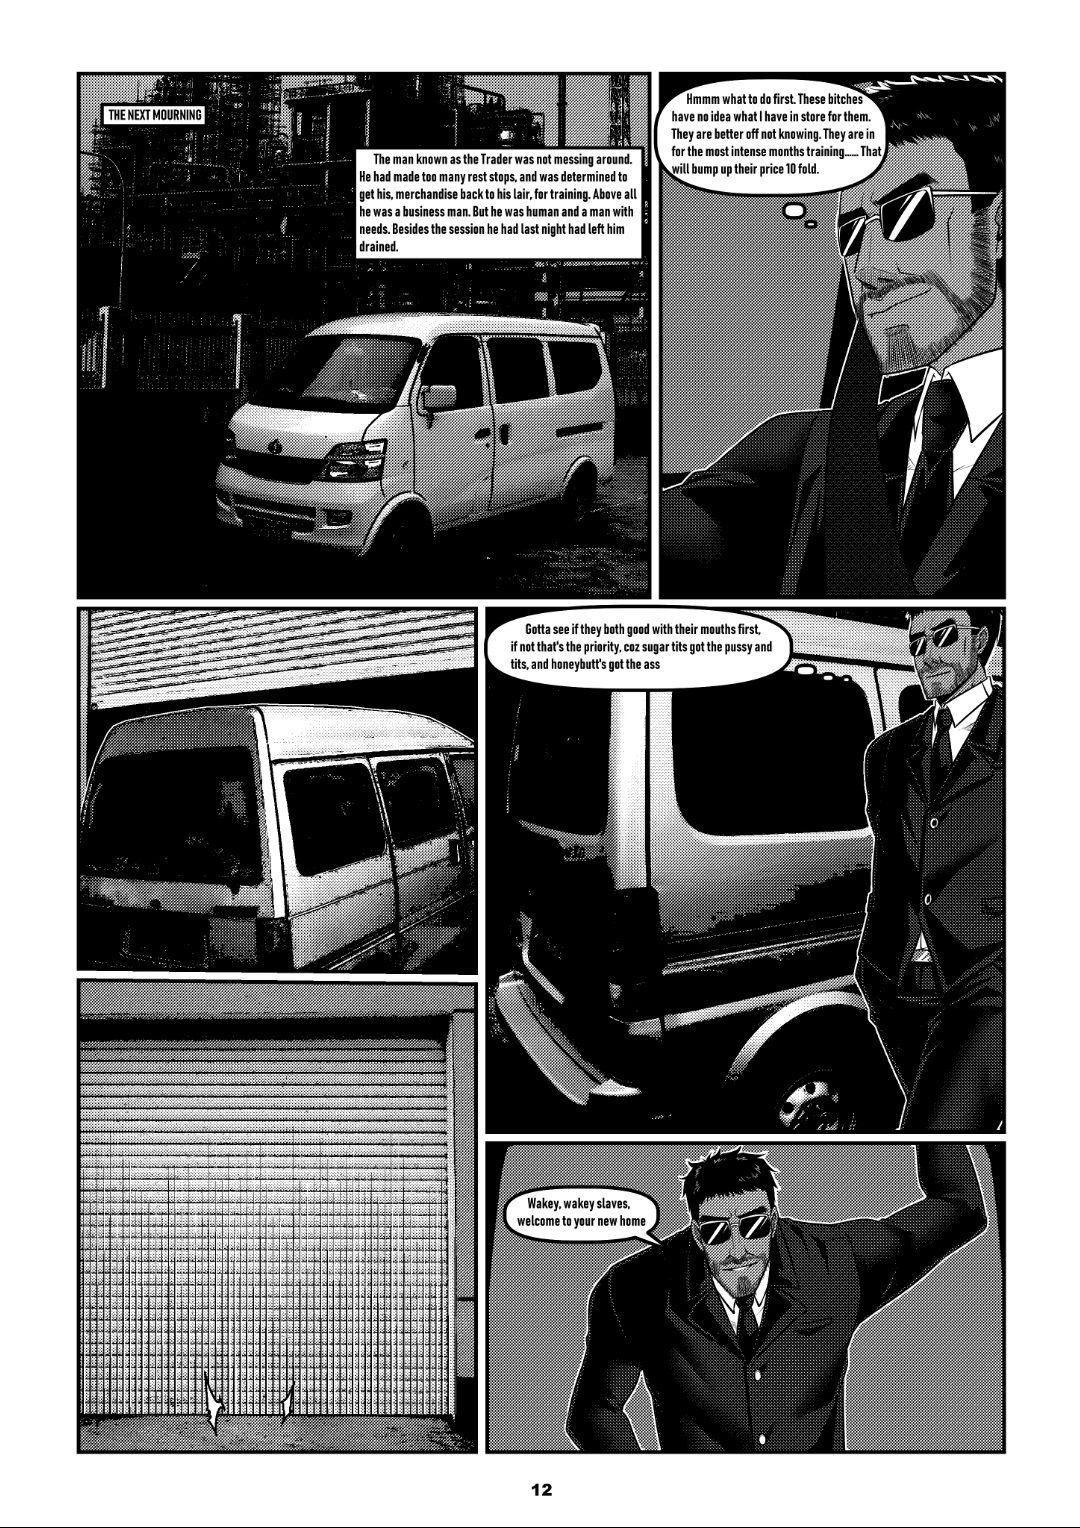 Smoking Voyages of the Trader 2 Youth Porn - Page 13